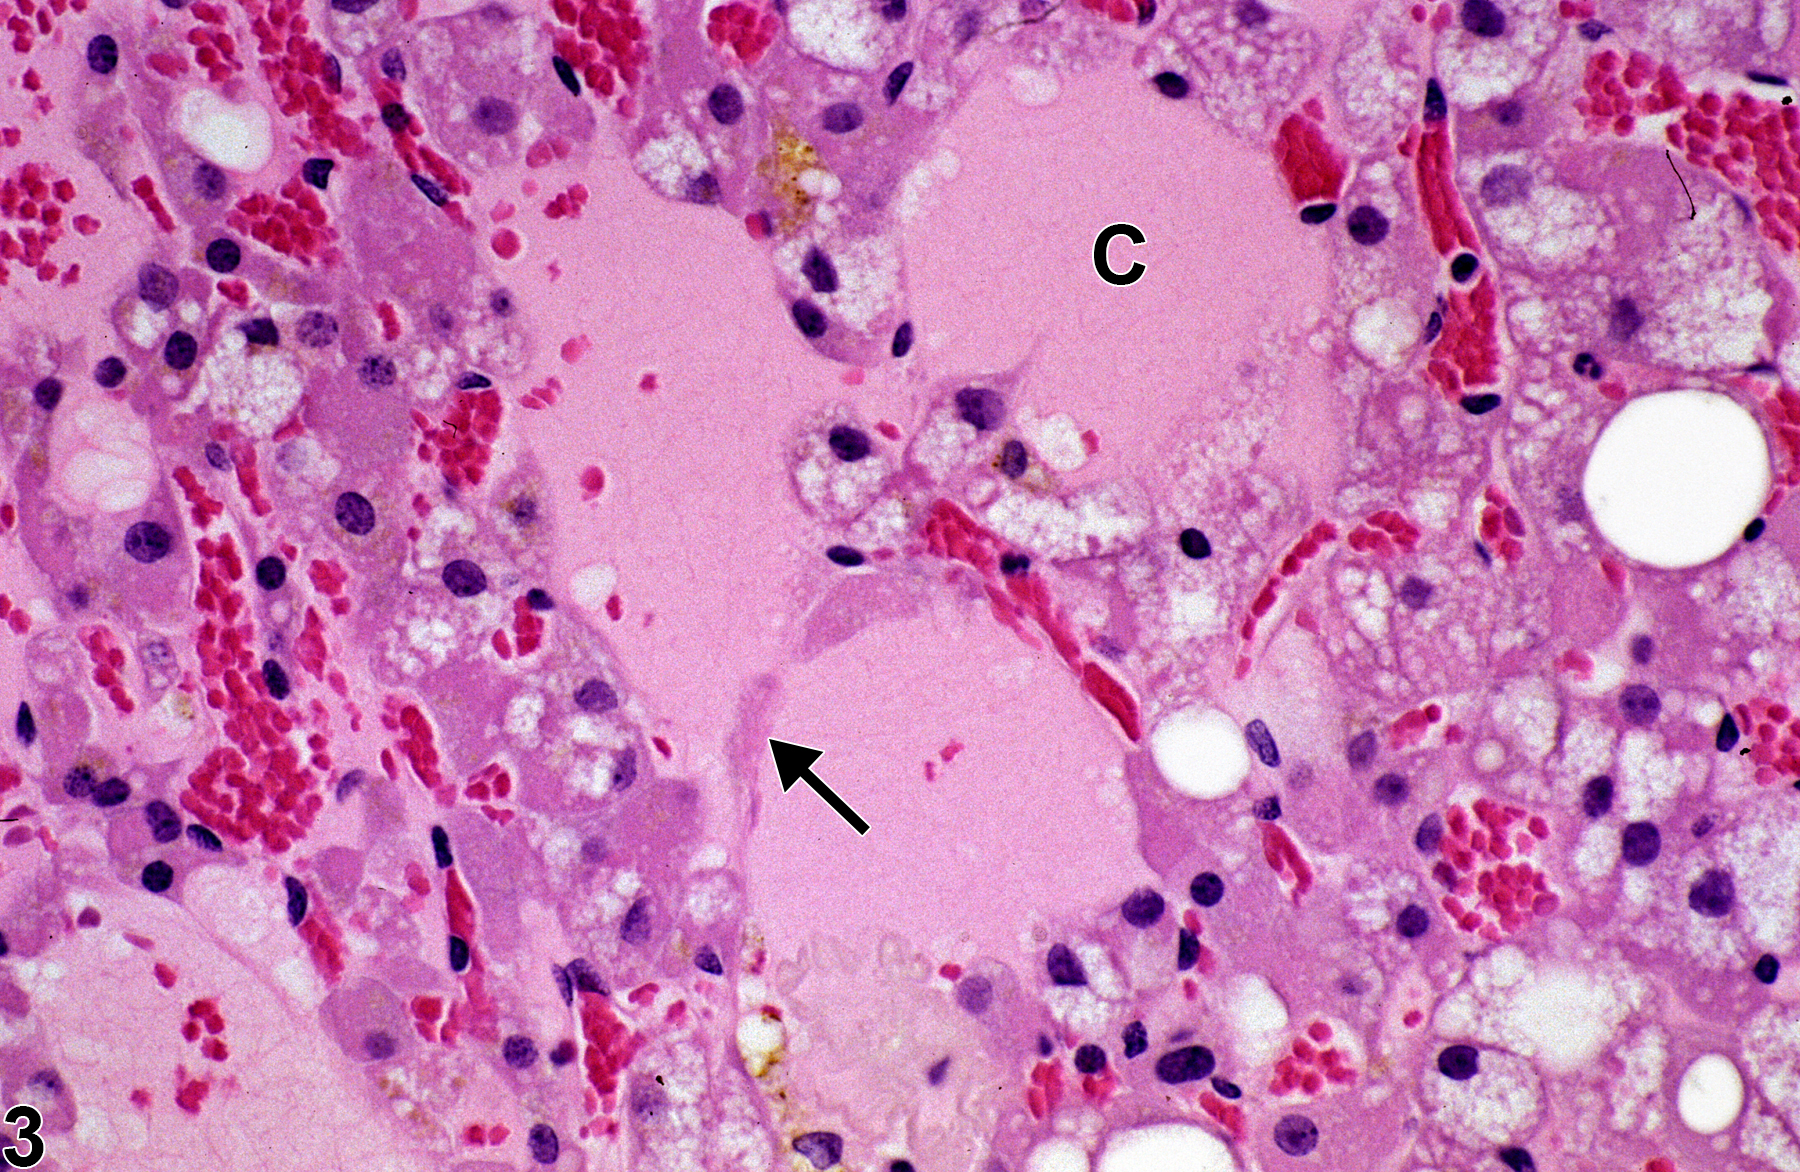 Image of degeneration, cystic in the adrenal gland cortex from a female Sprague-Dawley rat in a chronic study